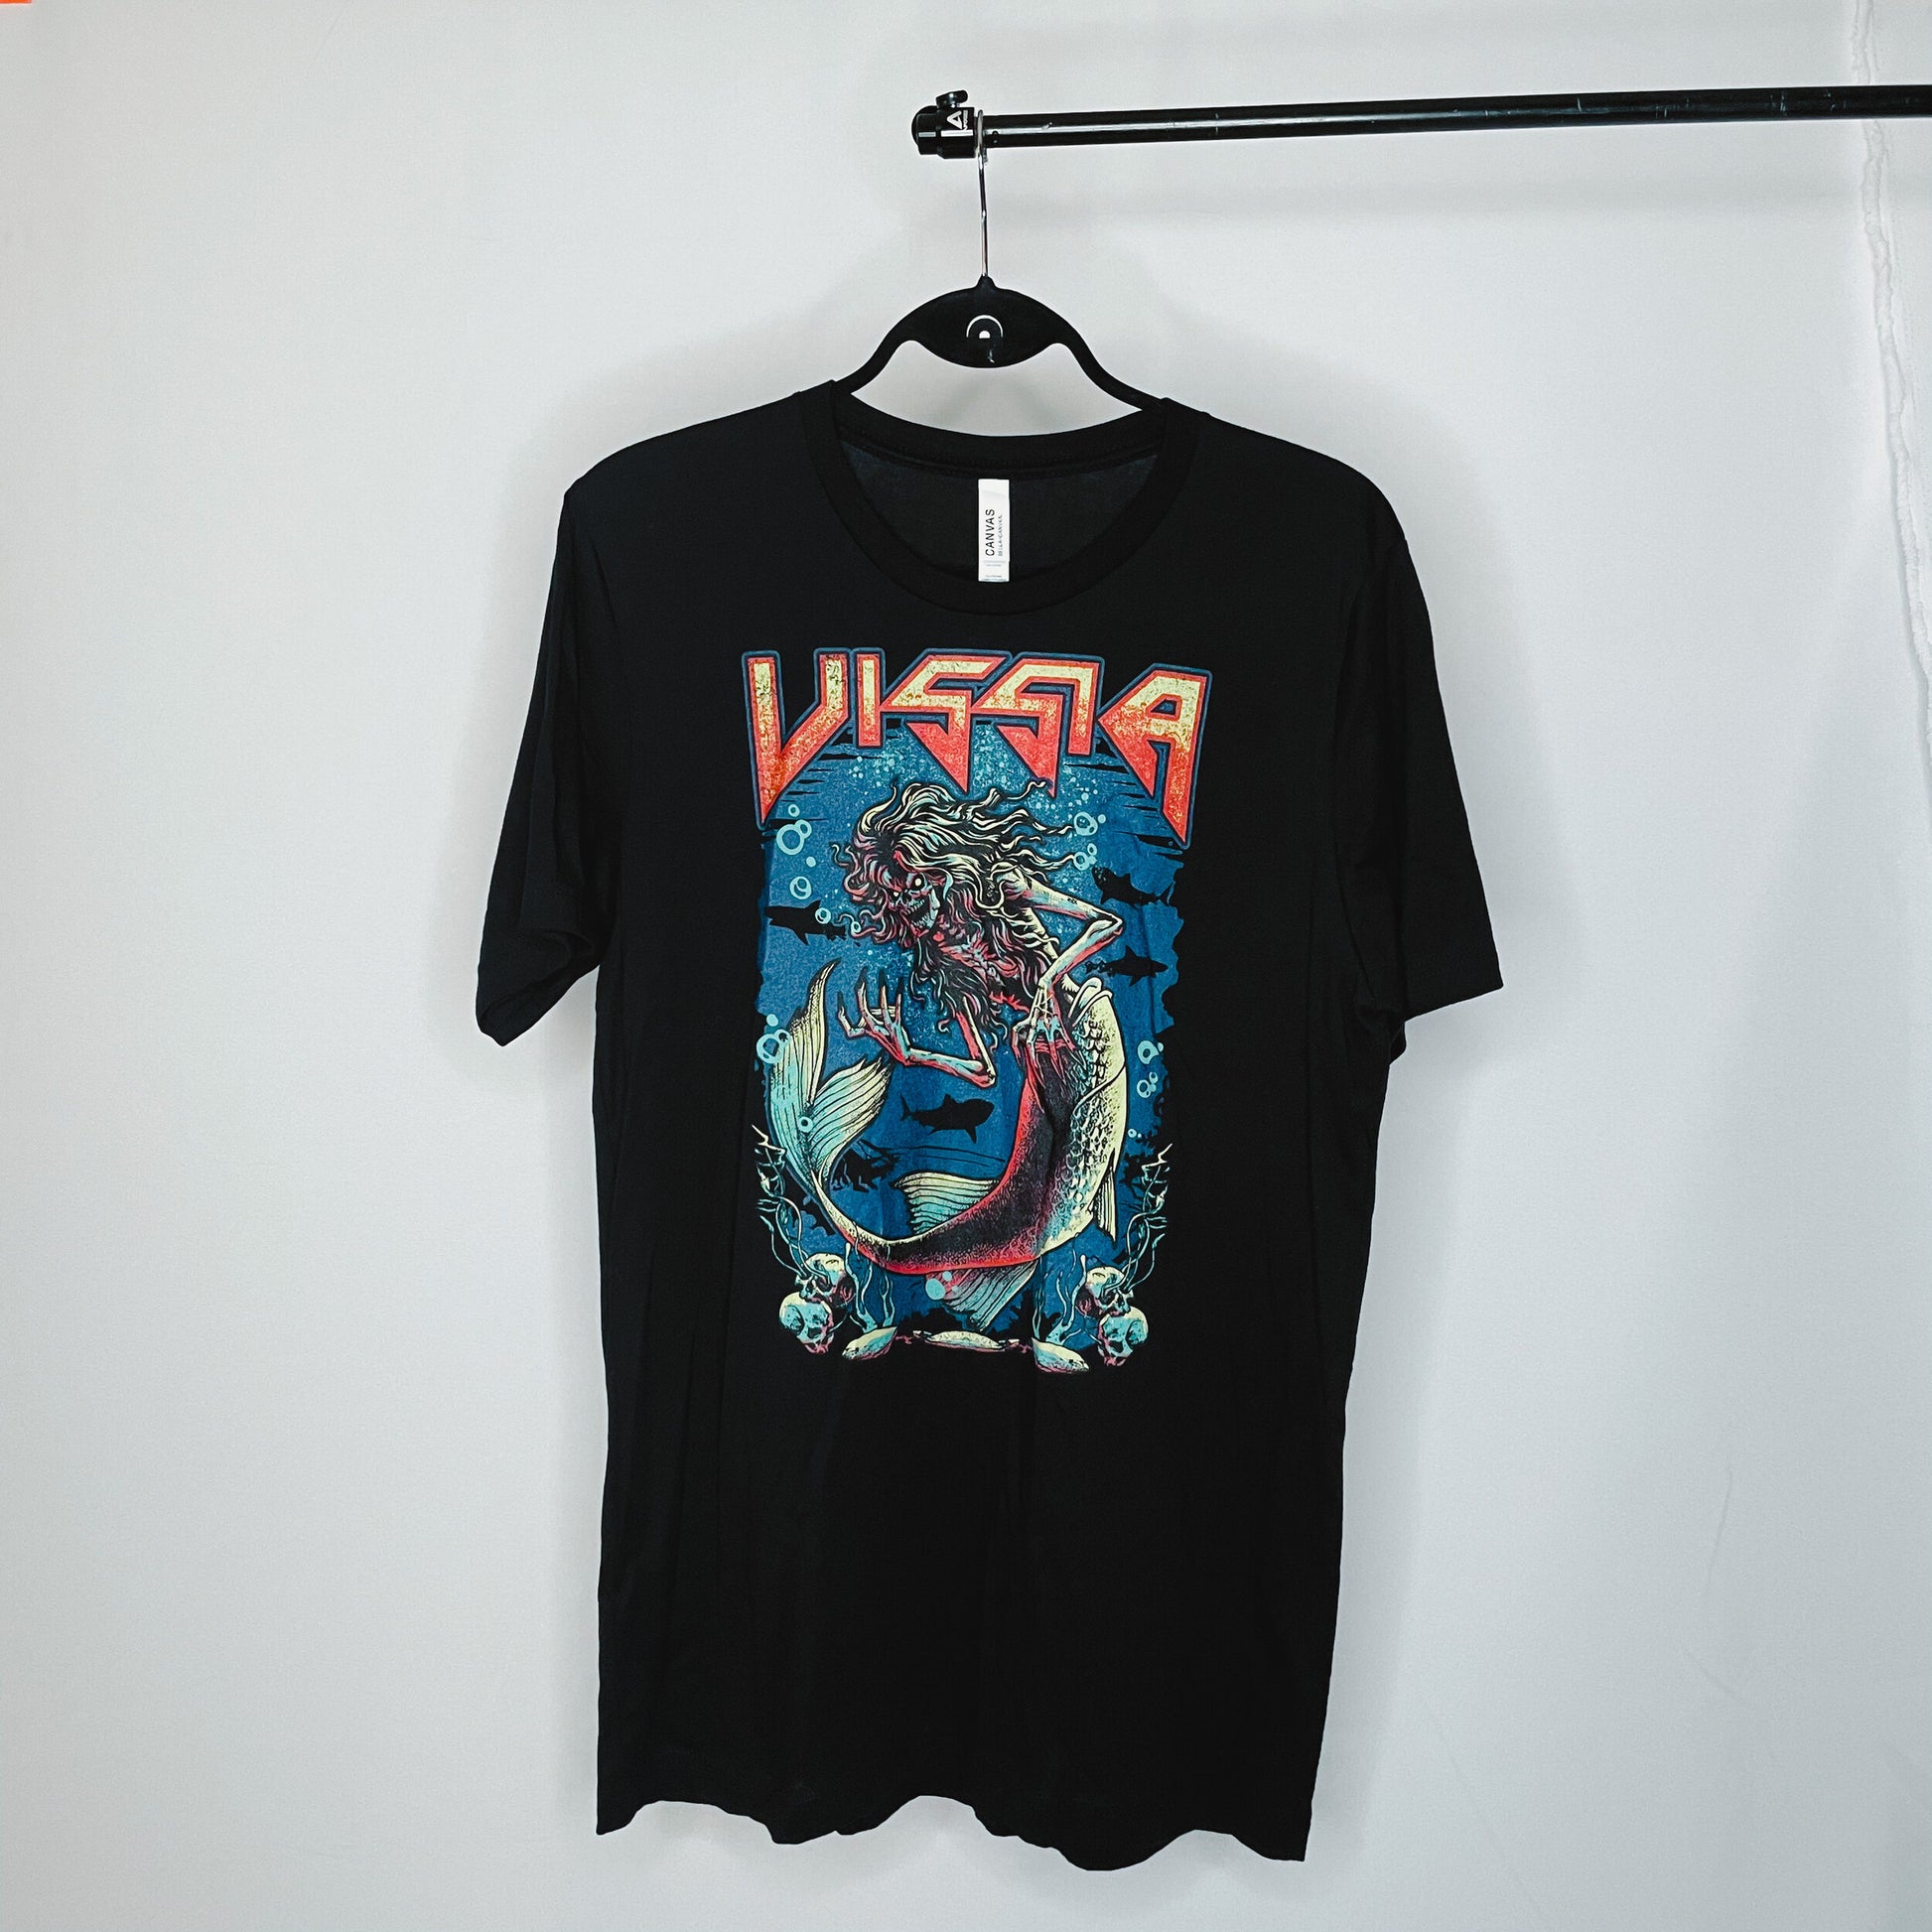 Black metal band style t-shirt; the t-shirt shows an illustration of a skeleton siren under the sea and "VISSIA" across the top